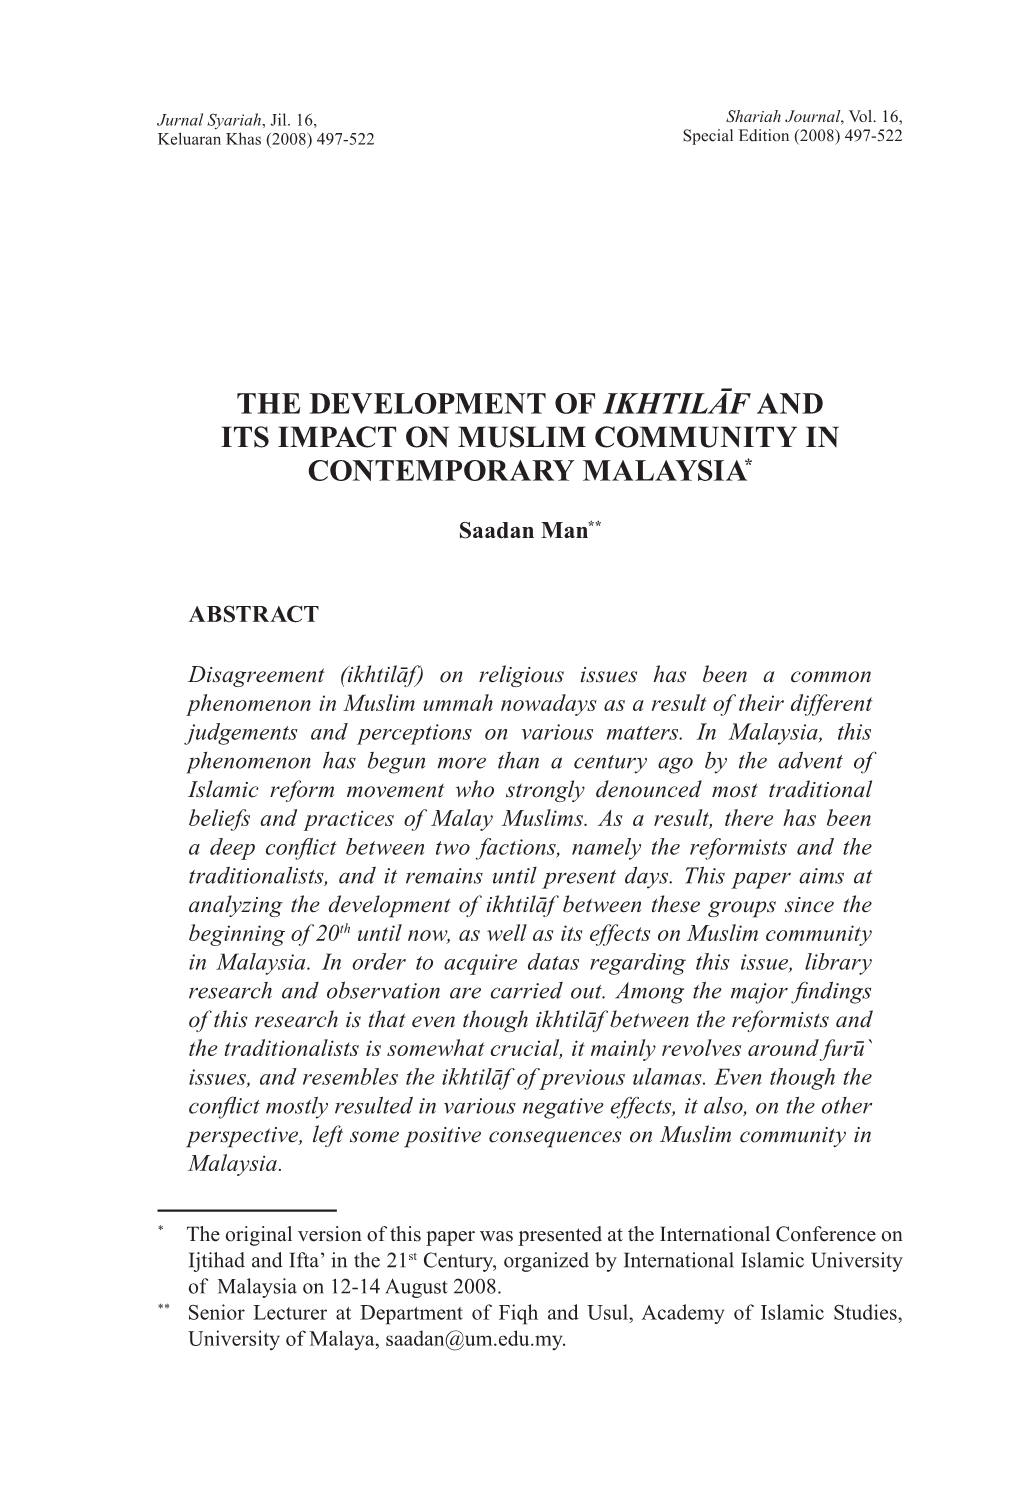 The Development of Ikhtilaf and Its Impact on Muslim Community in Contemporary Malaysia*